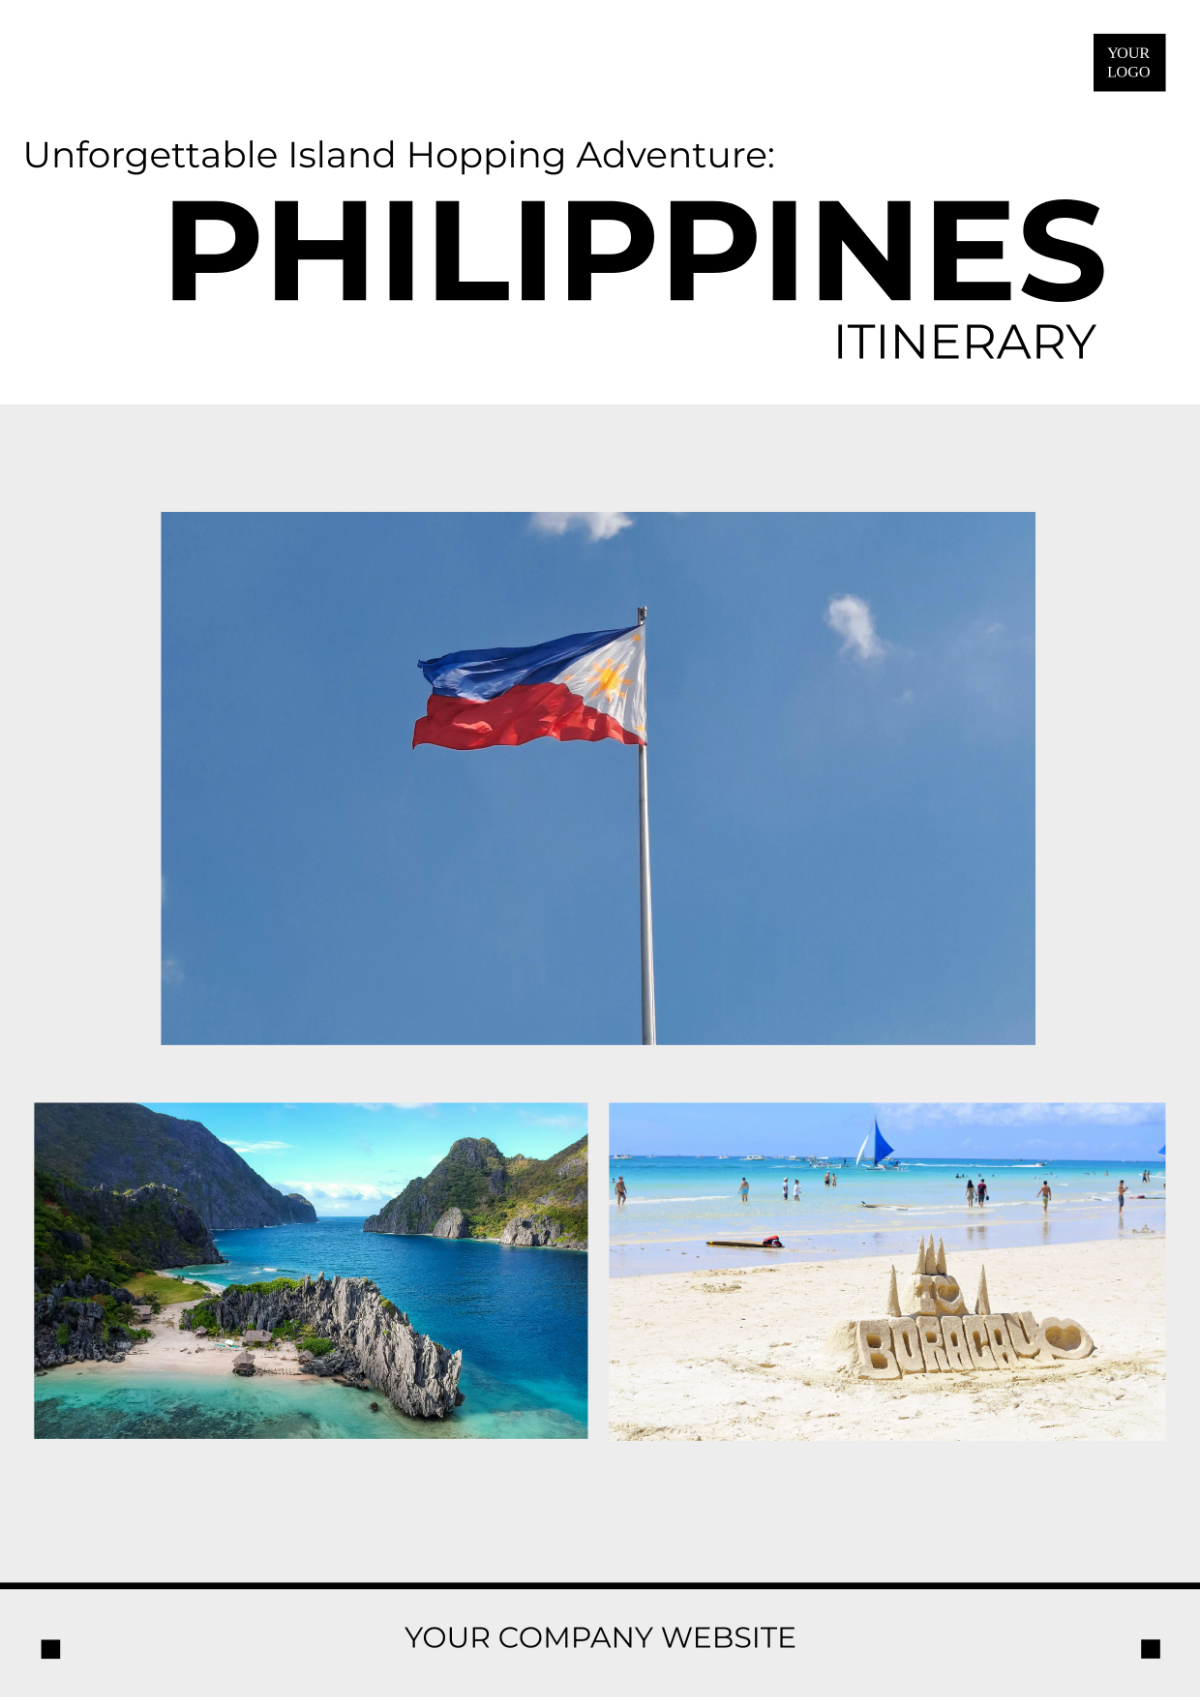 Philippines Island Hopping Itinerary Template